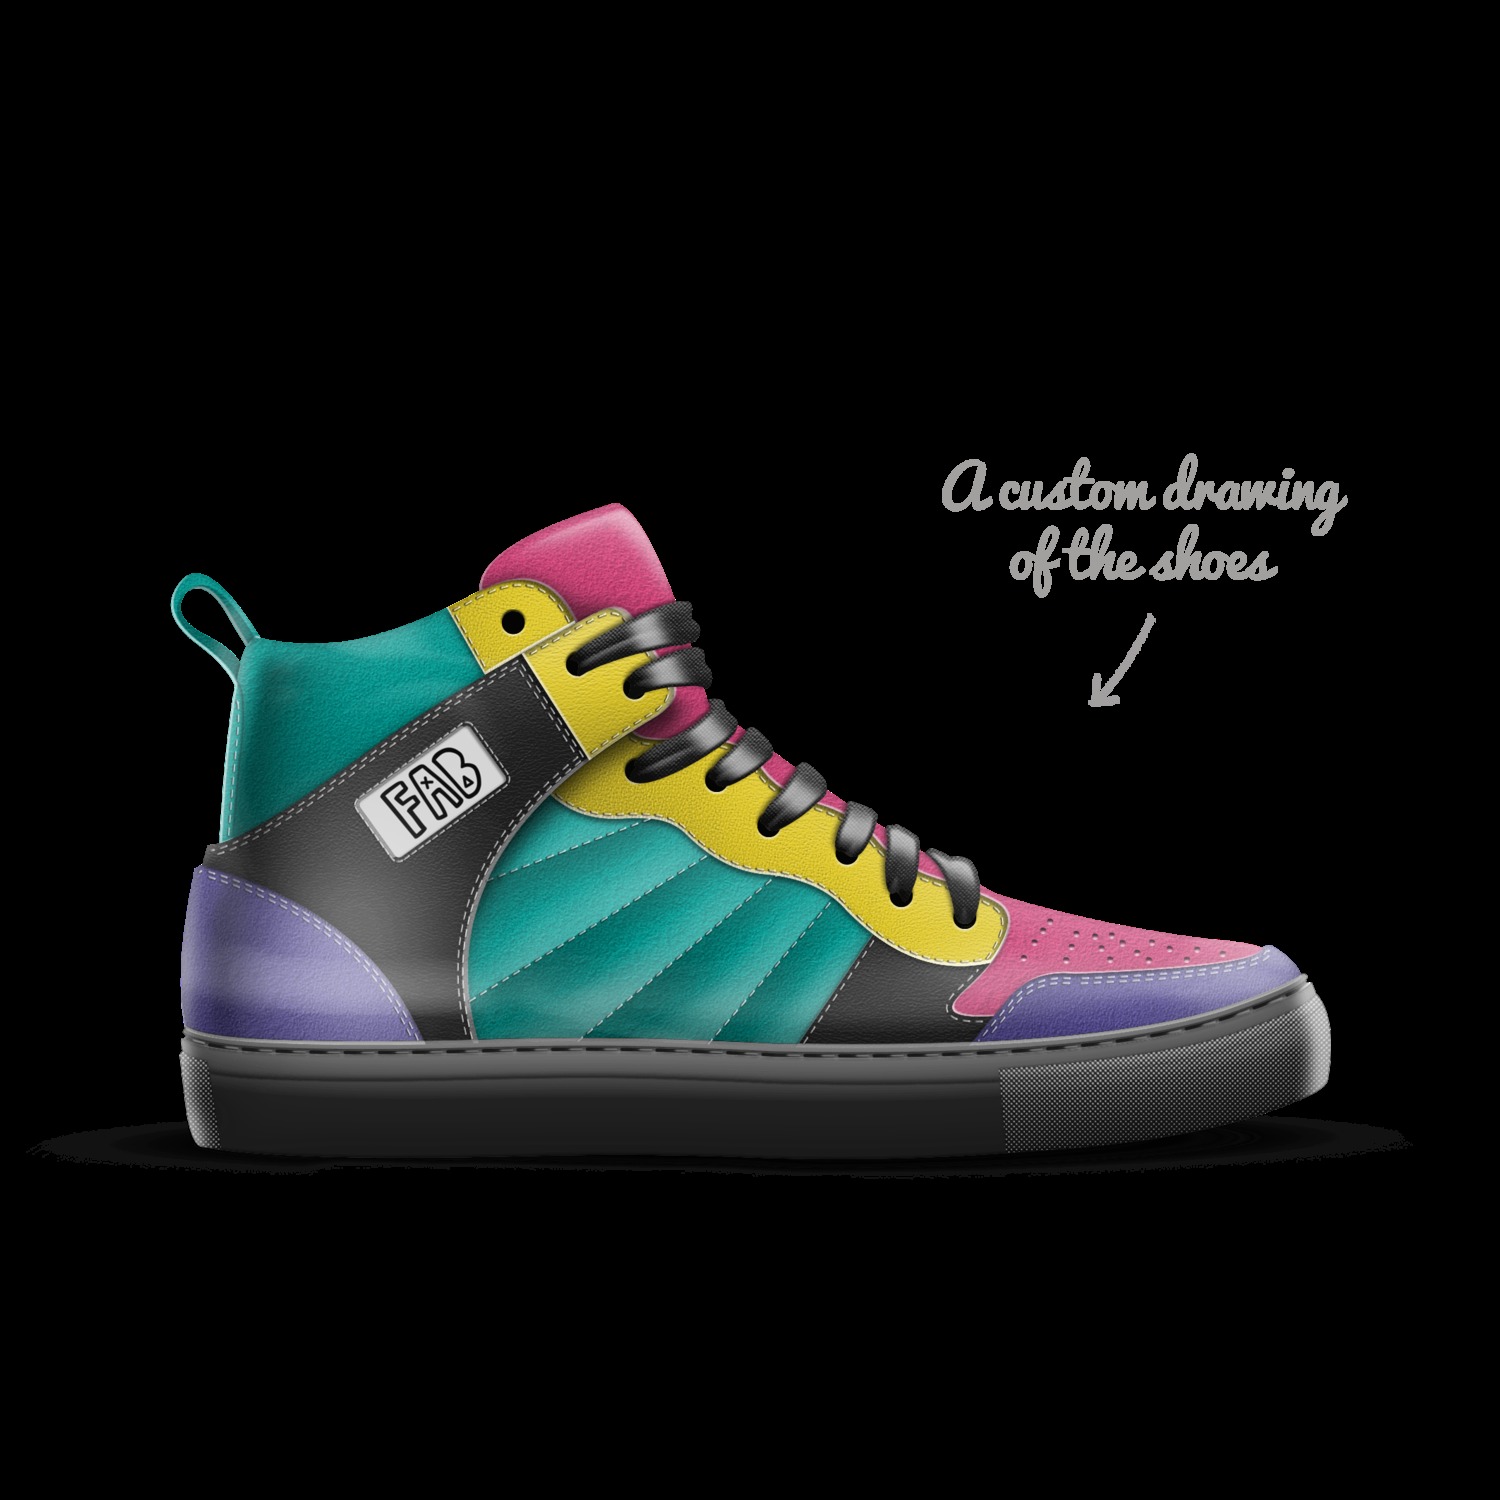 FAB V1 | A Custom Shoe concept by Fabs